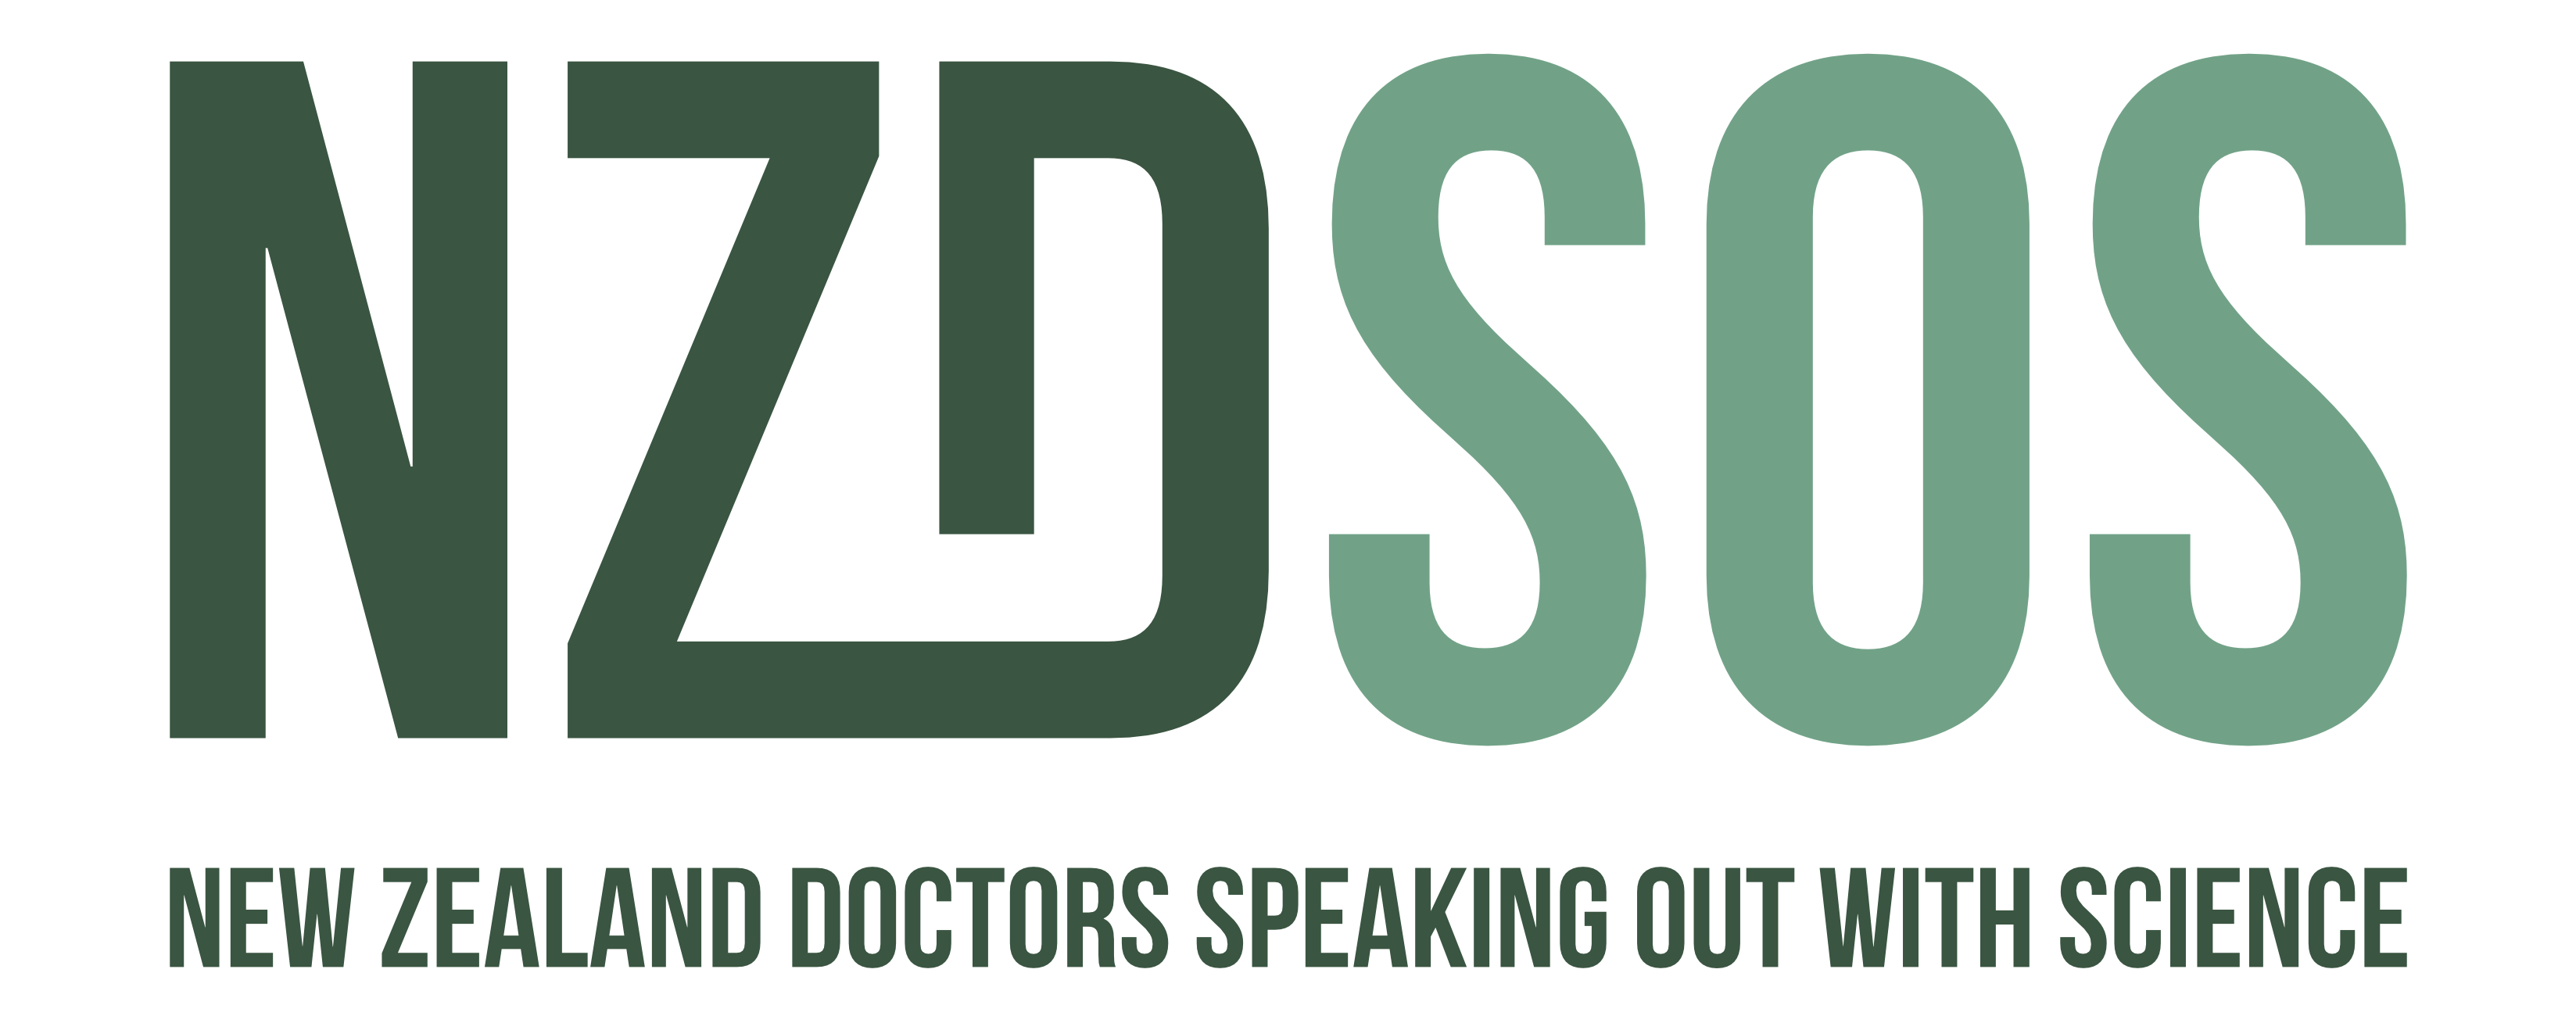 NZ Doctors Speaking Out With Science